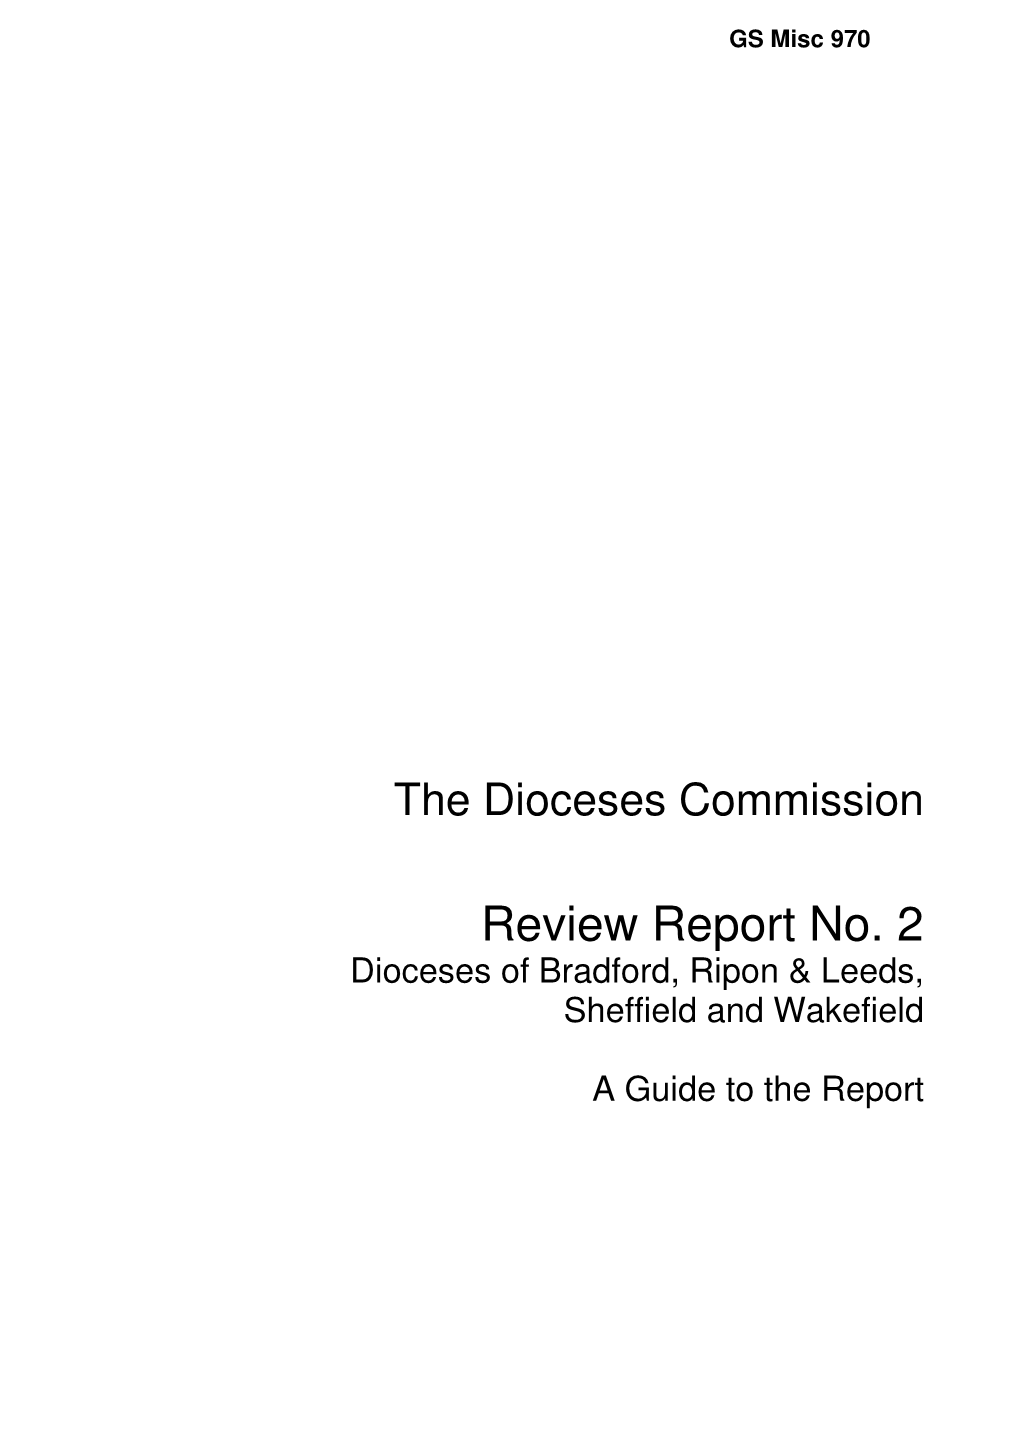 Review Report No. 2 Dioceses of Bradford, Ripon & Leeds, Sheffield and Wakefield